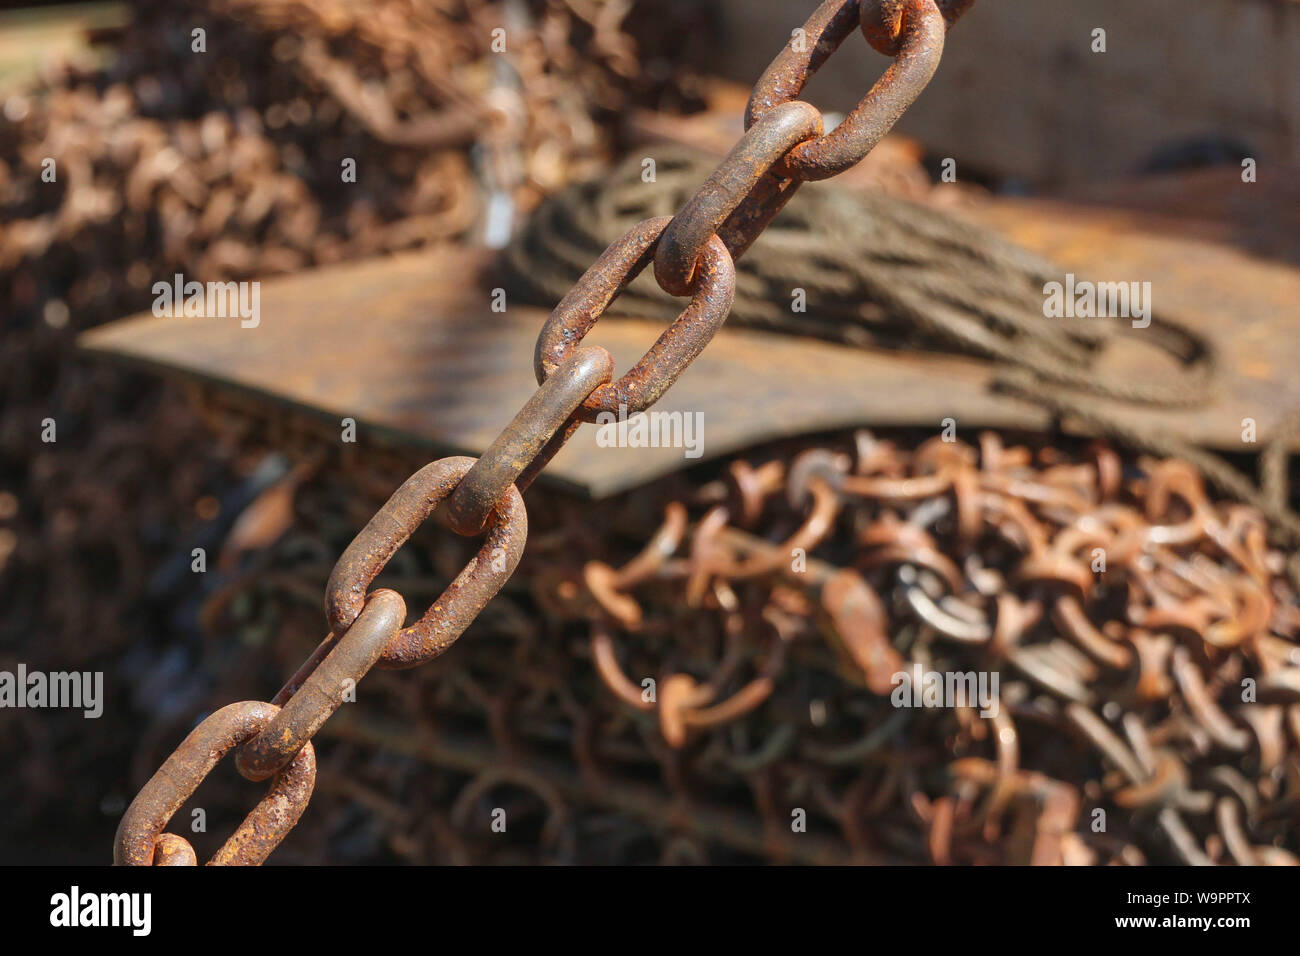 Close-up of coiled rusty chain Stock Photo